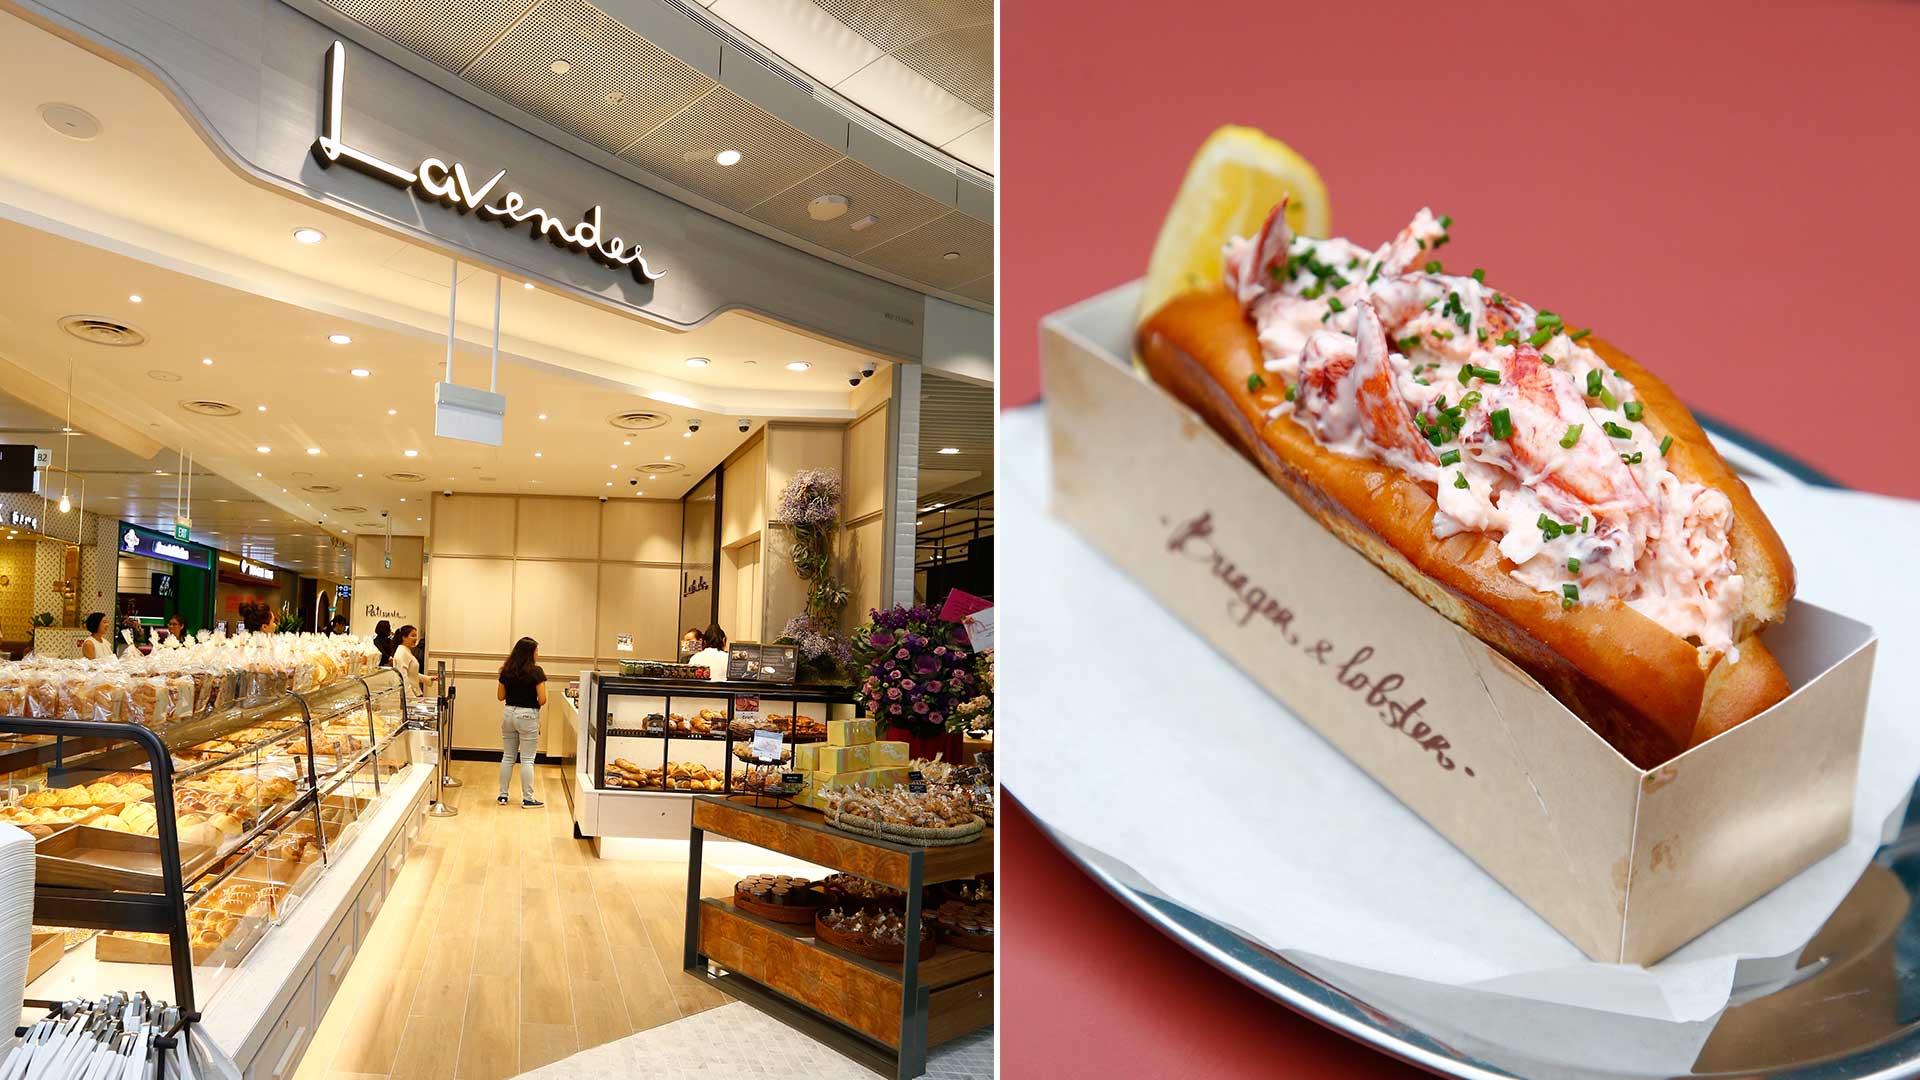 Jewel Changi Airport Restaurants Like A&W & Lavender Bakery Open Today, Here’s What To Eat